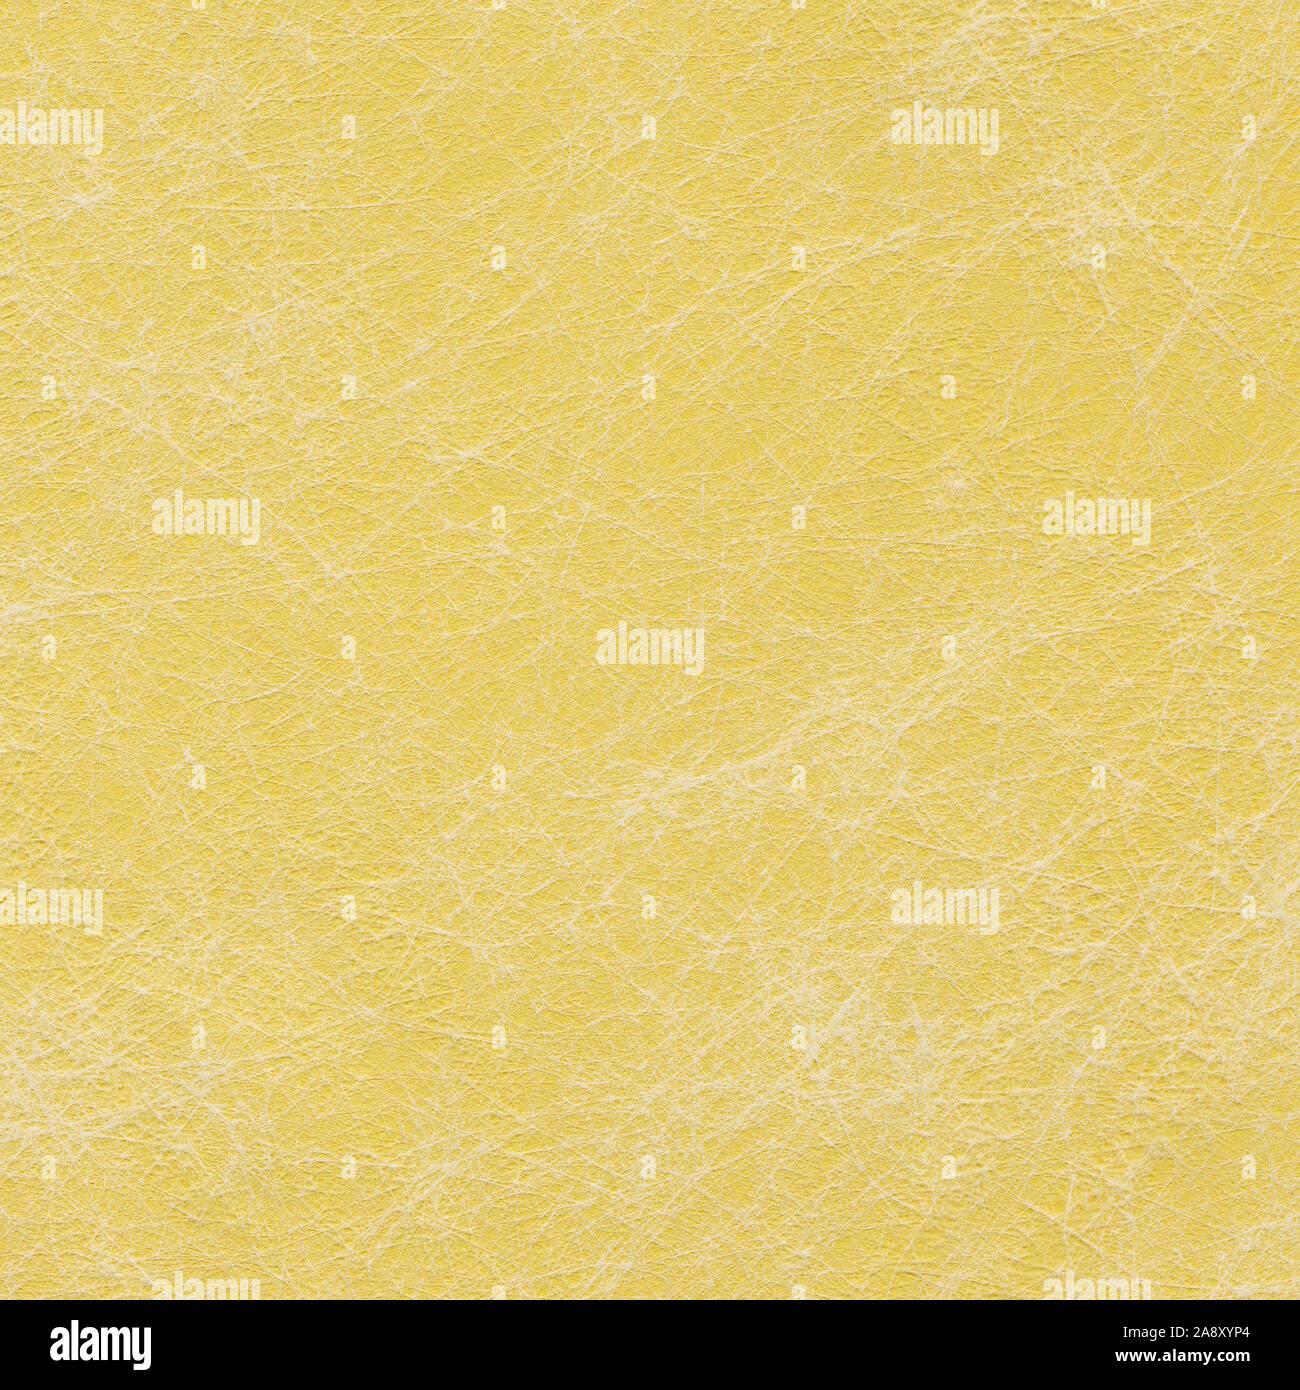 Yellow paper background with white pattern Stock Photo